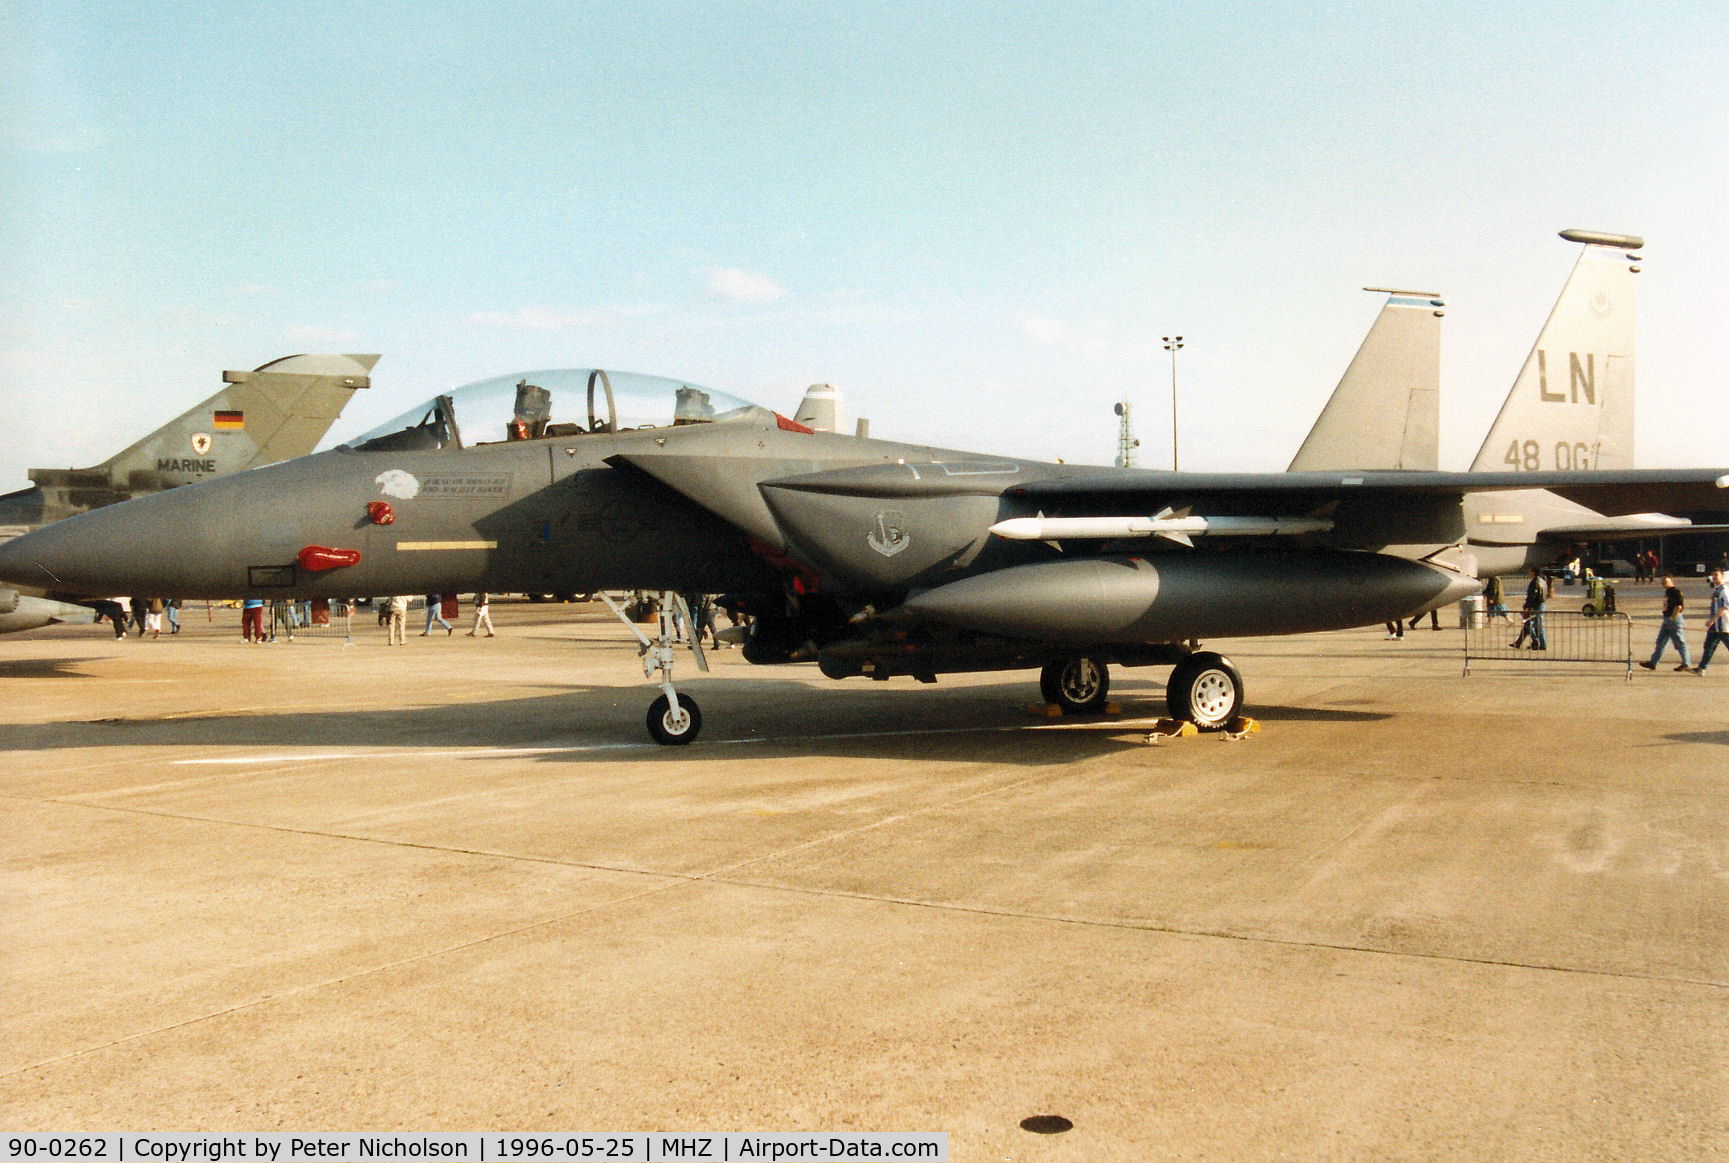 90-0262, 1990 McDonnell Douglas F-15E Strike Eagle C/N 1204/E164, F-15E Strike Eagle of 492nd Fighter Squadron/48th Fighter Wing at RAF Lakenheath on display at the 1996 RAF Mildenhall Air Fete.